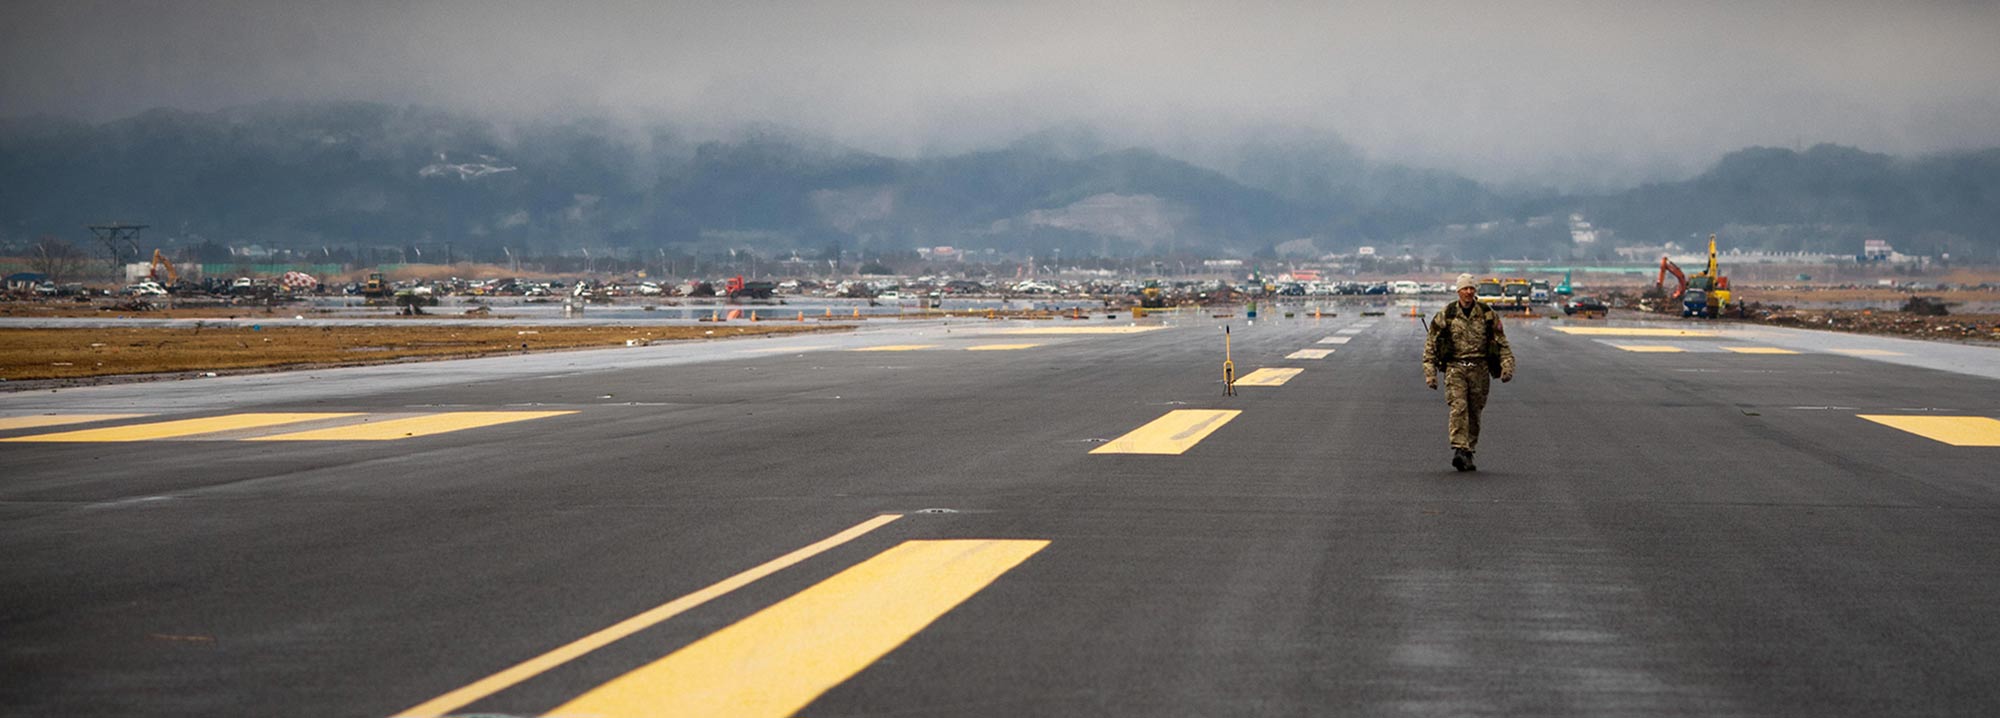 Five days after the Great
East Japan Earthquake, the
main runway at Sendai
Airport was ready for
military aircraft to land. The
runway had recently been
remediated to withstand
soil liquefaction from
ground shaking.